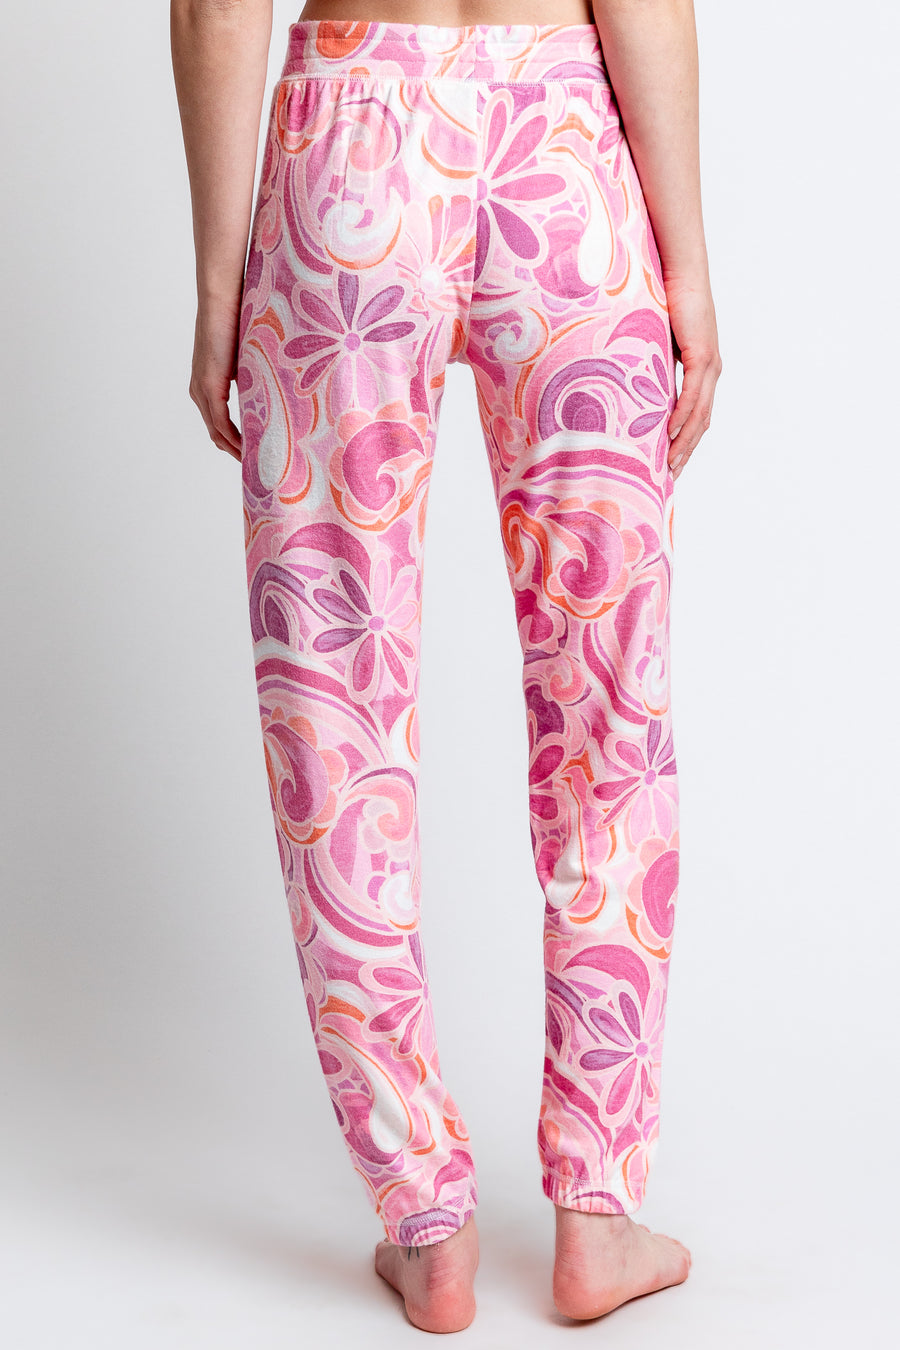 PJ Salvage Stay Groovy Band Pant in Pink Sky